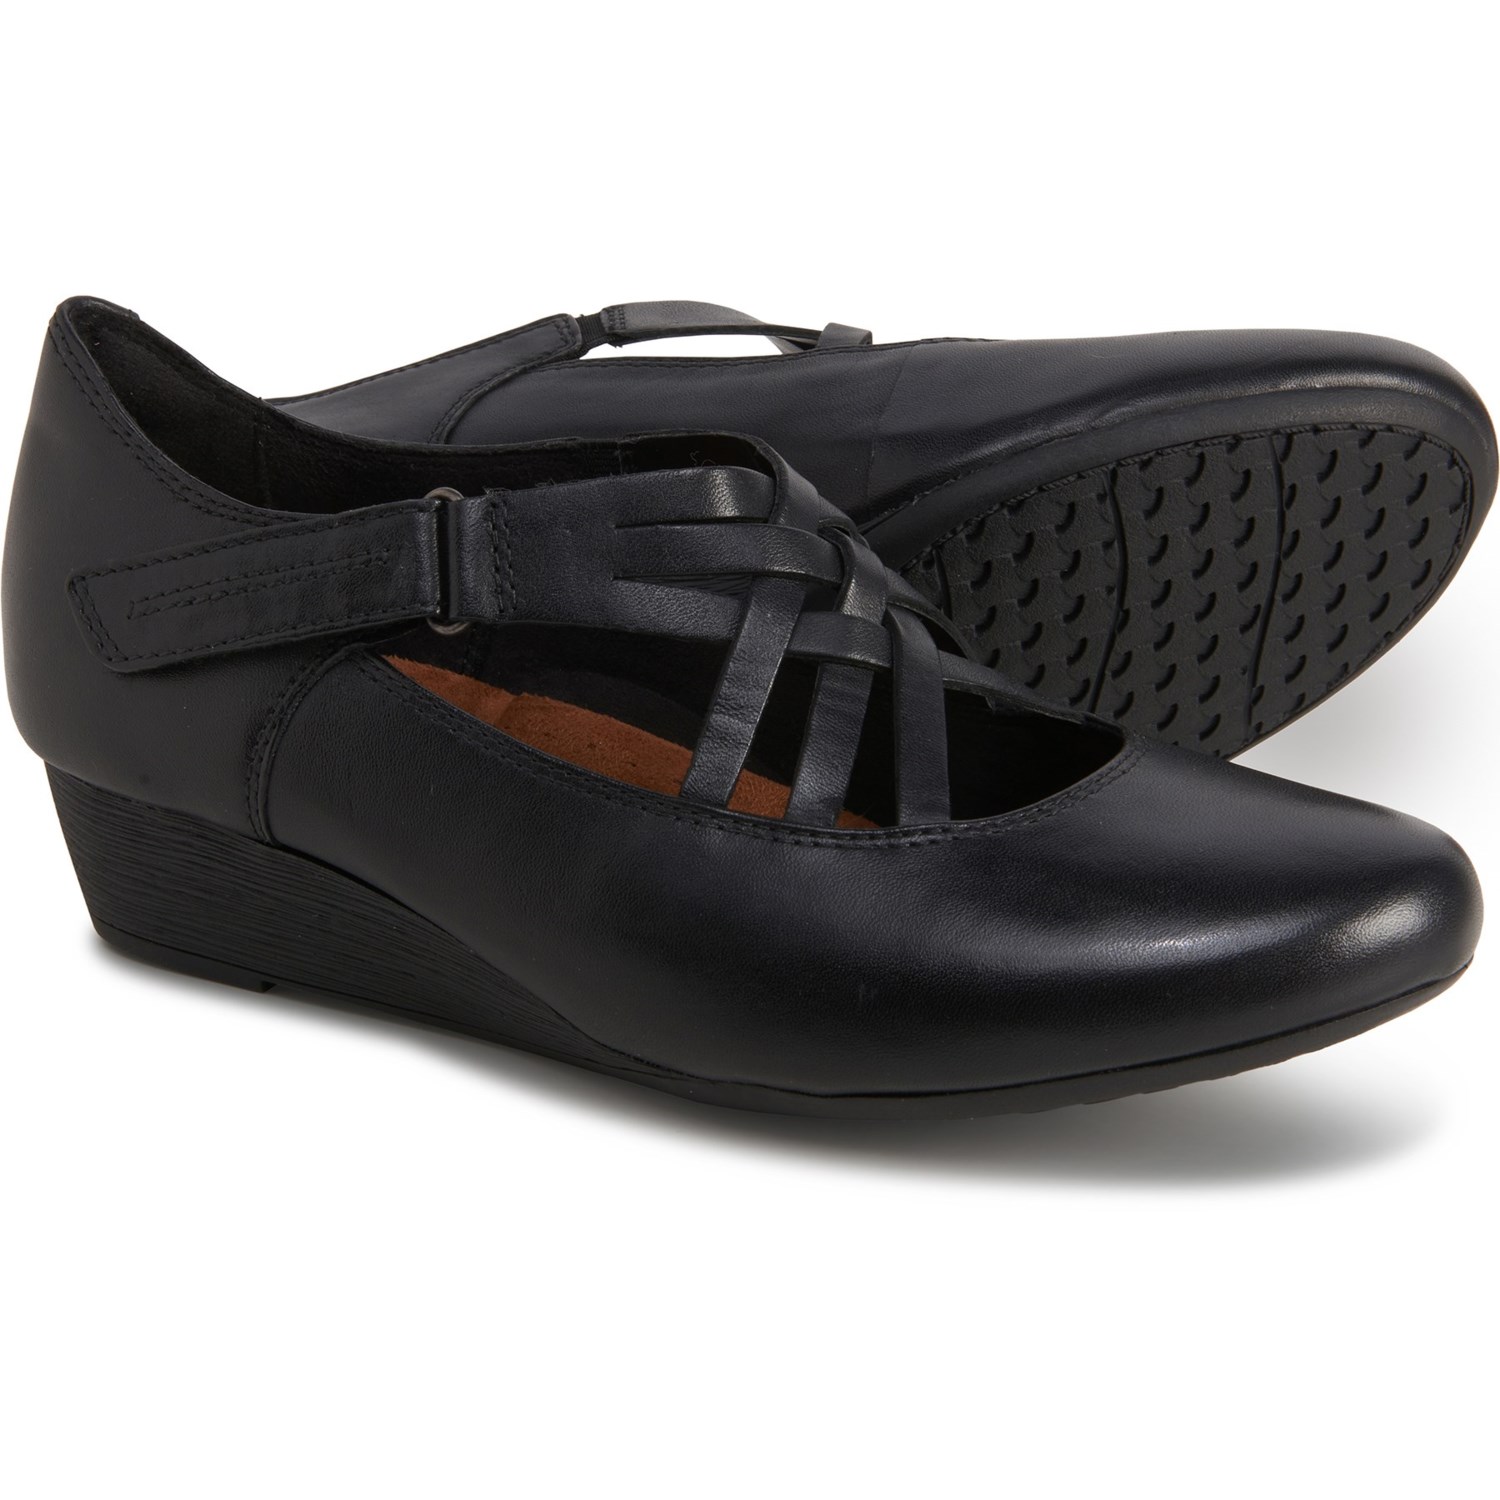 rockport shoes cobb hill collection